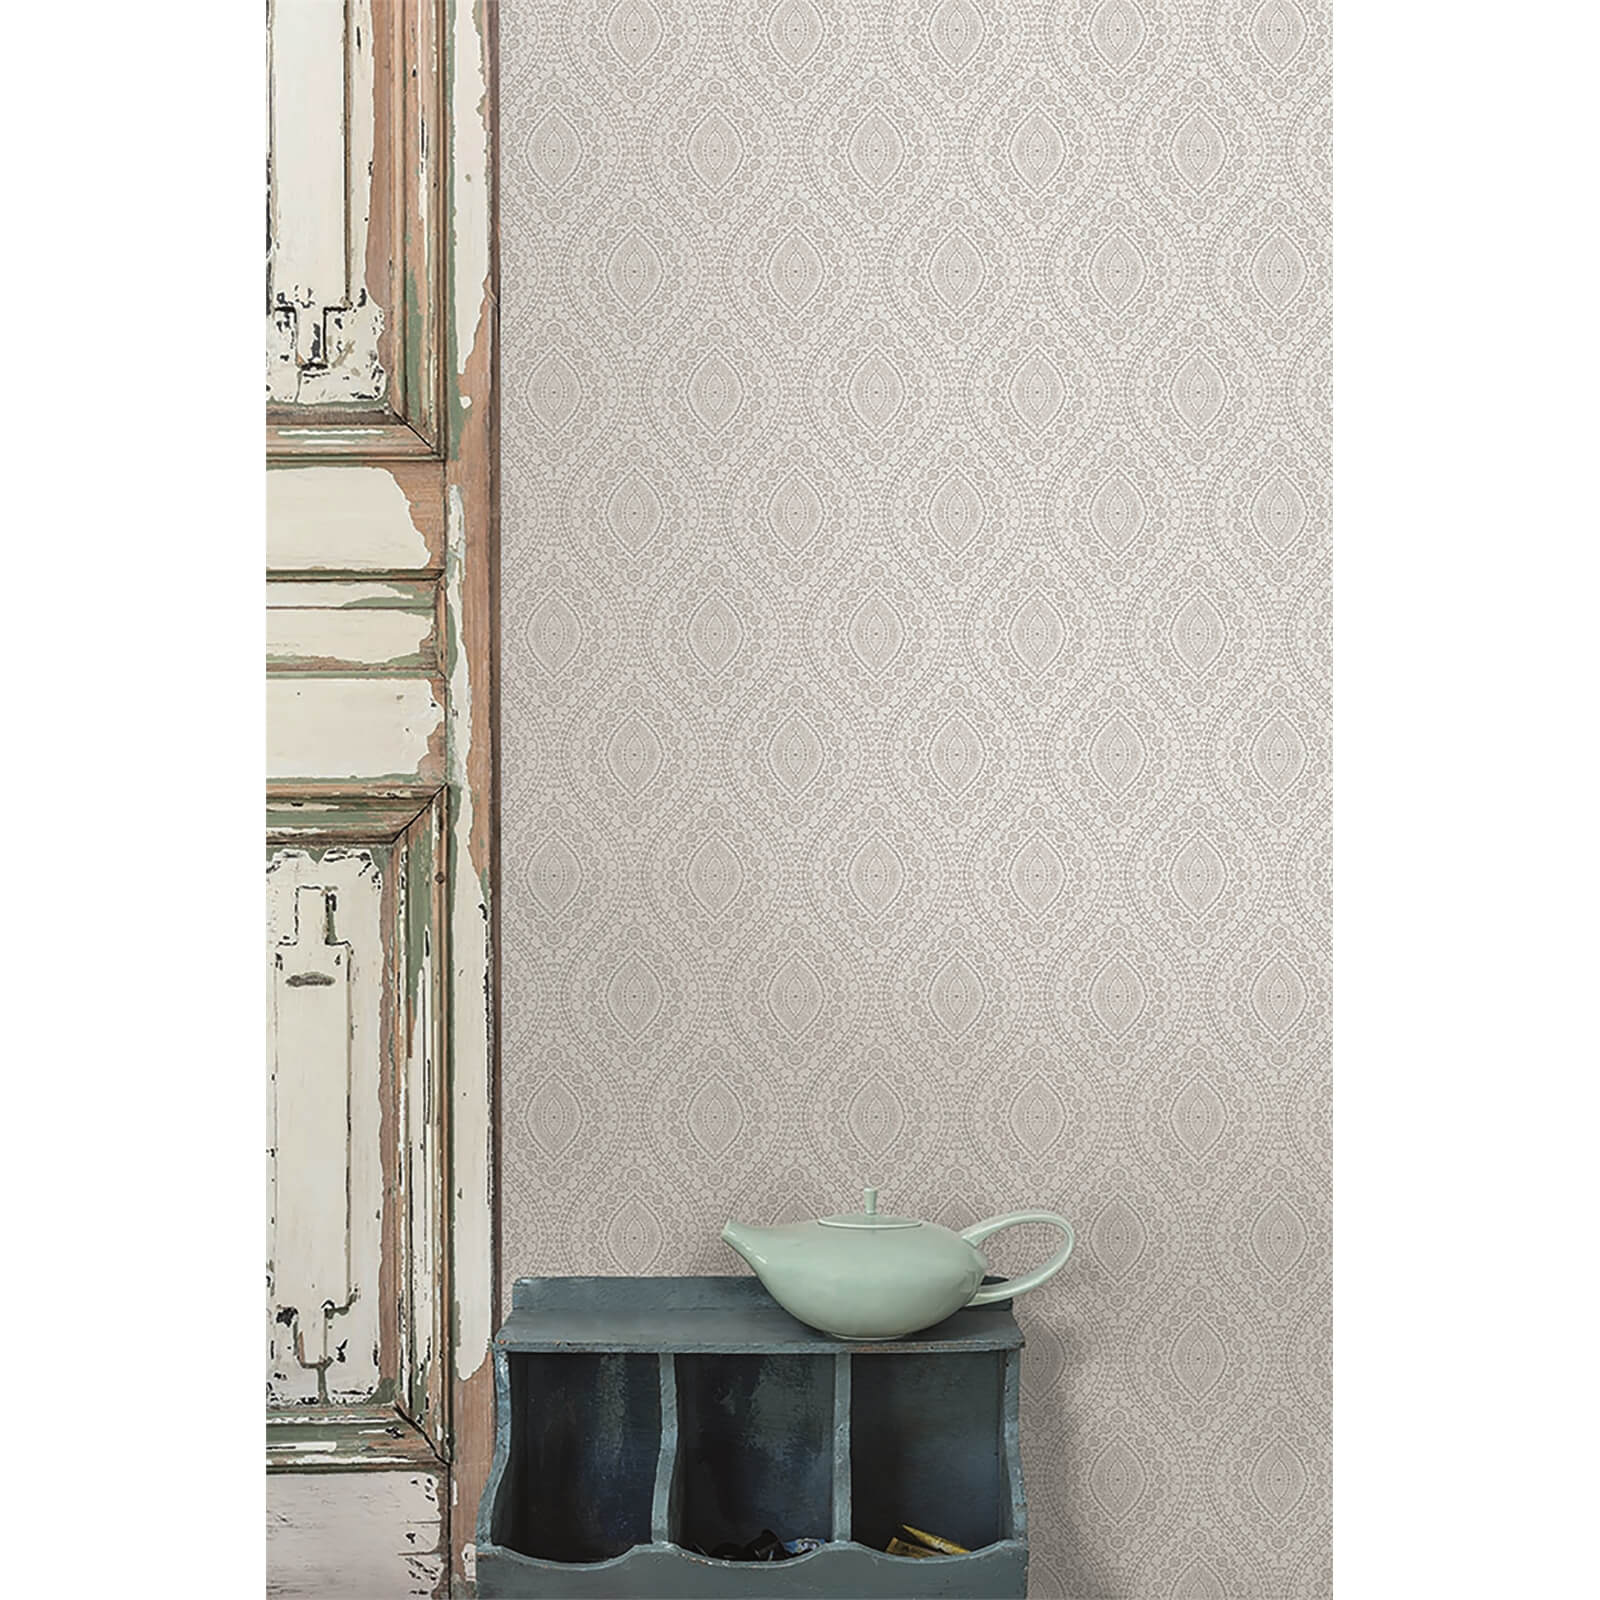 Grandeco Stitched Ogee Grey Wallpaper